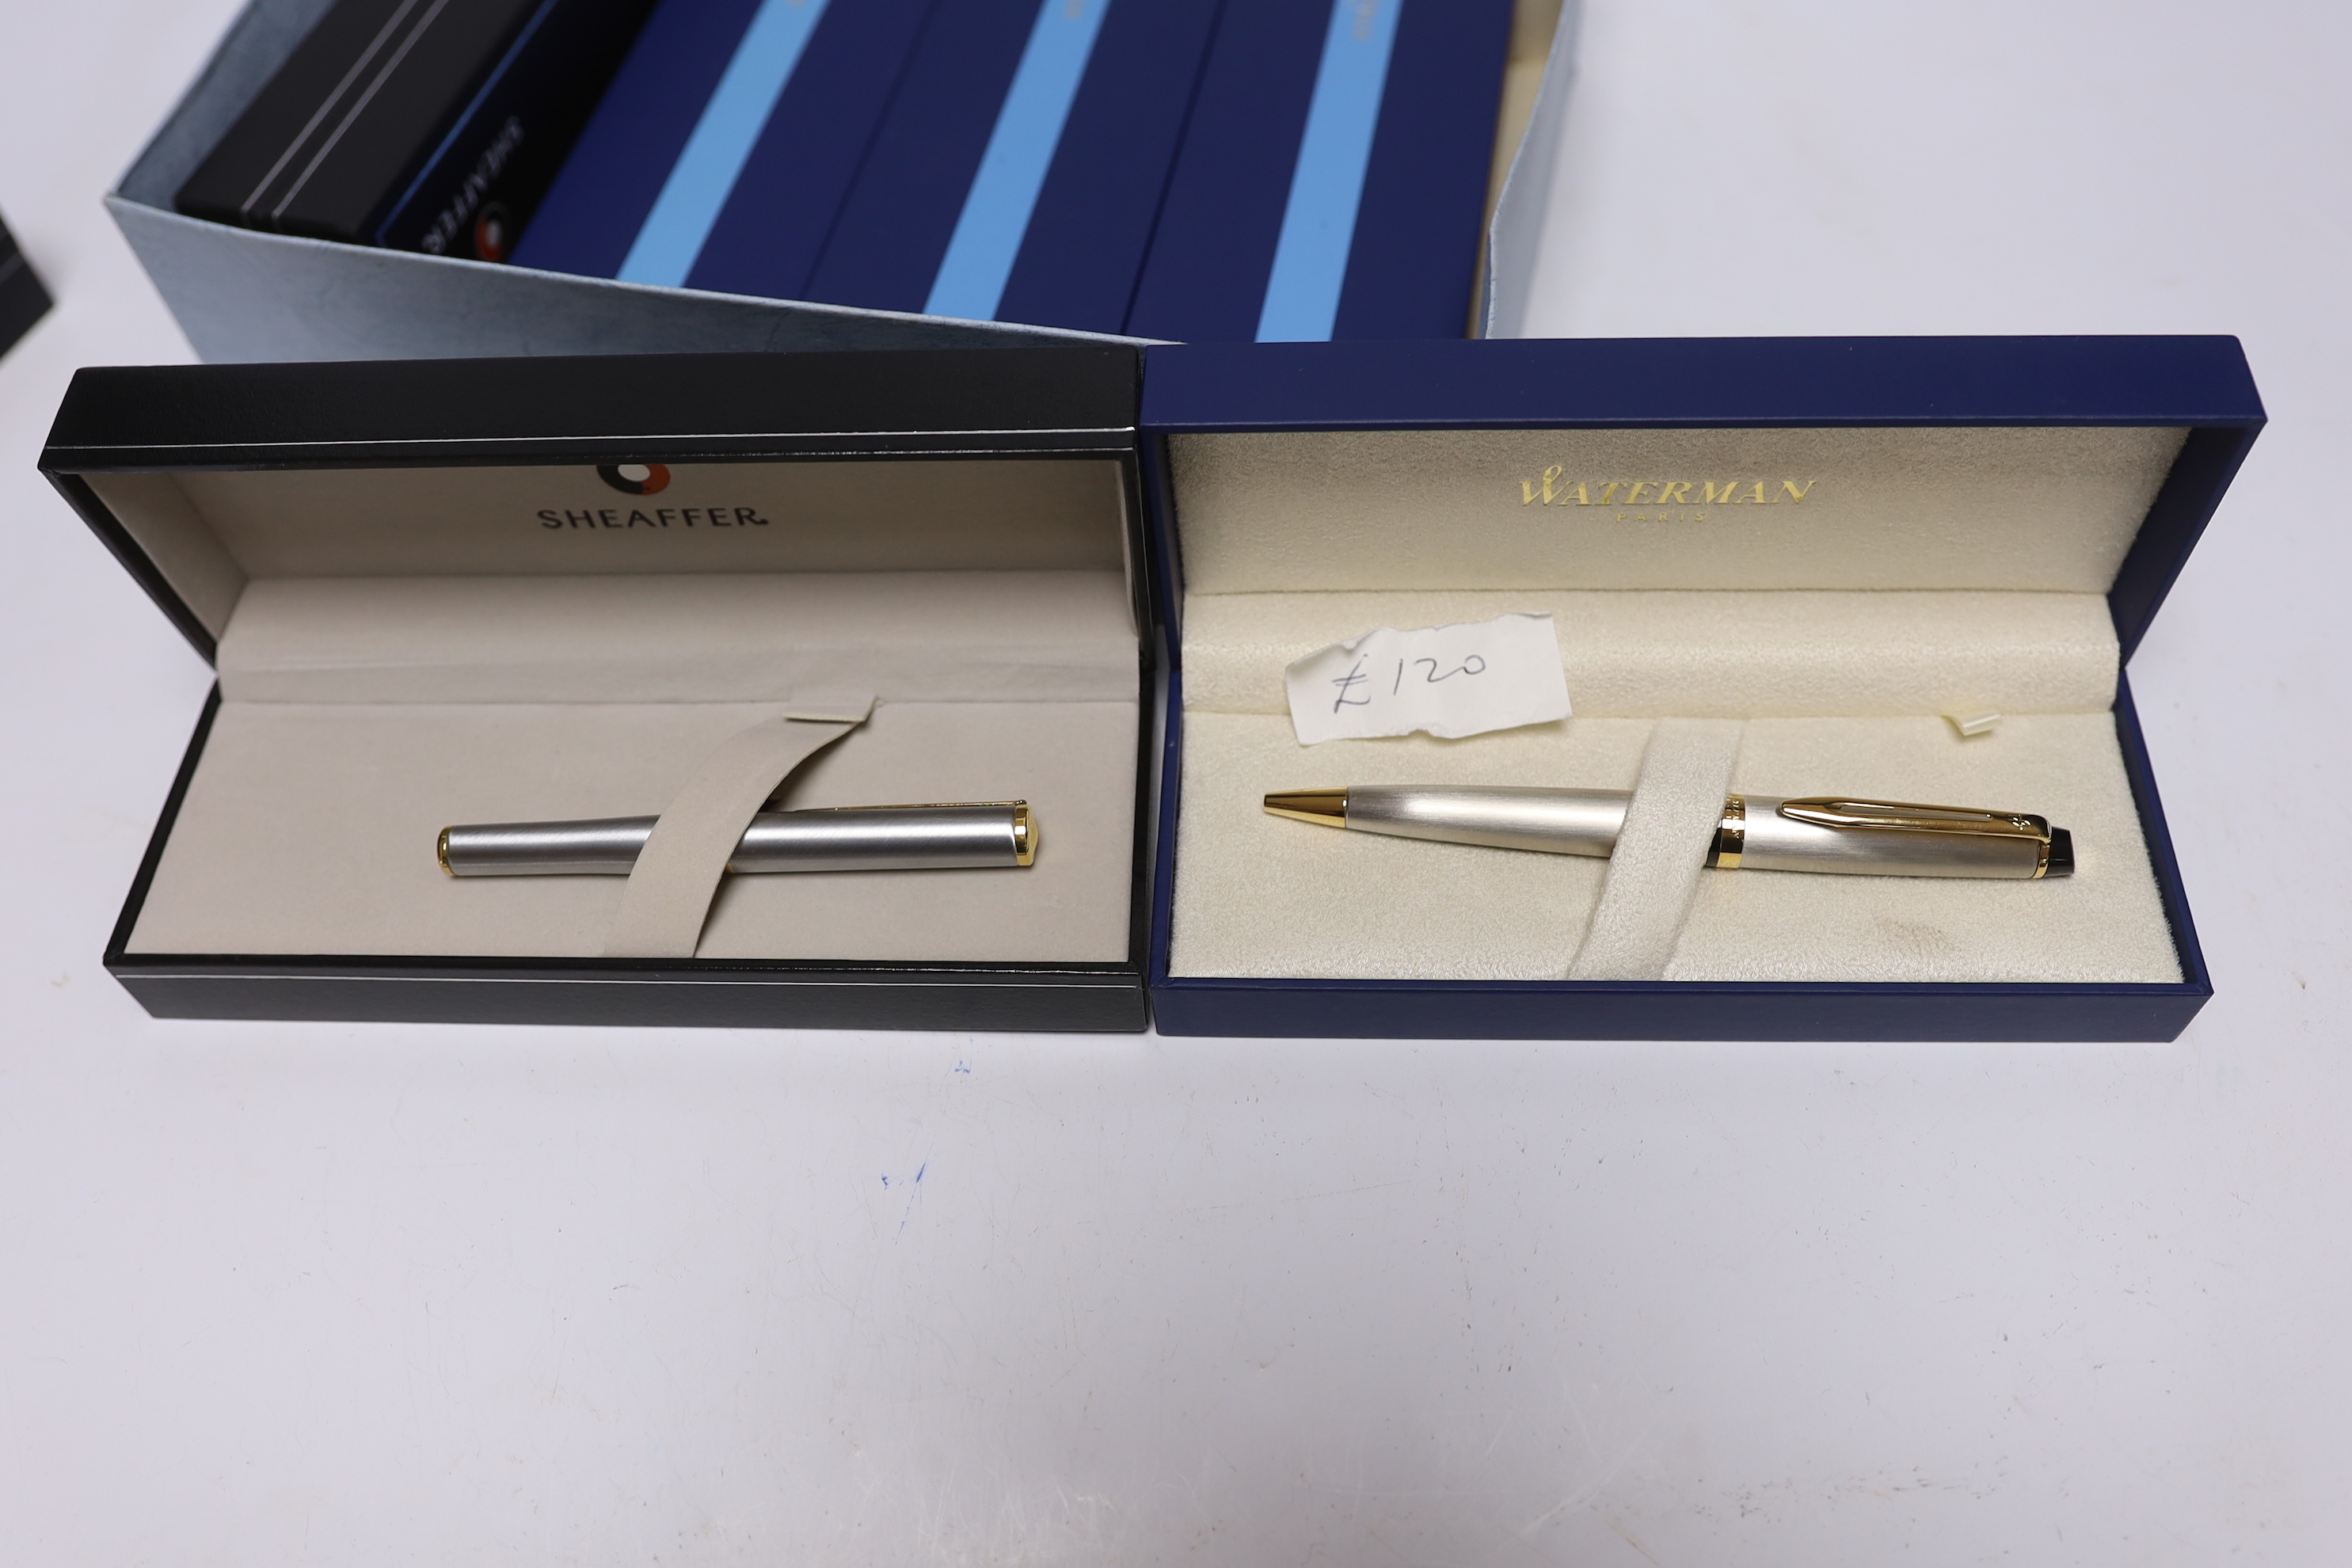 Eight boxed Waterman and Sheaffer pens; two Expert Ballpoint pens, two Hemisphere Ballpoint pens, a Hemisphere Rollerball pen, and three Sheaffer 300 series Ballpoint pens